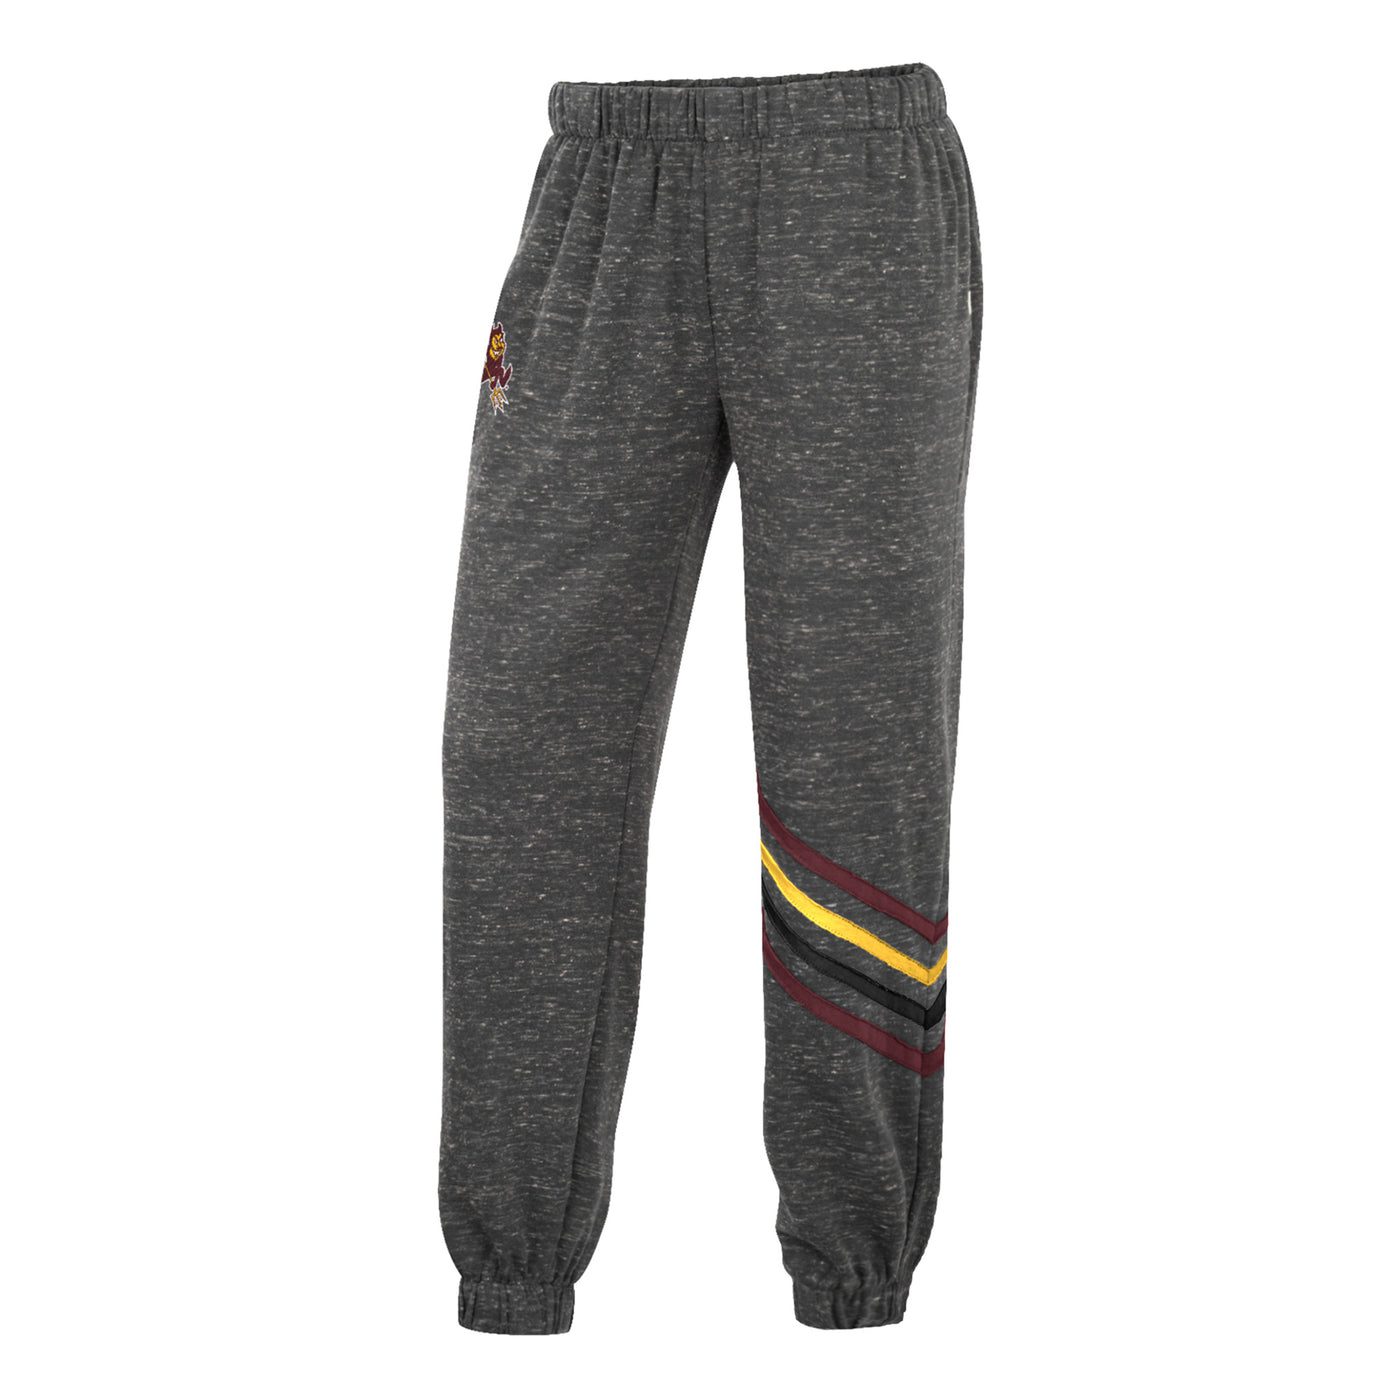 ASU grey heather sweatpants with banded ankles. Left leg has four colored stripes in gold, maroon, and black. Right leg features a small sparky logo  near the pocket. 